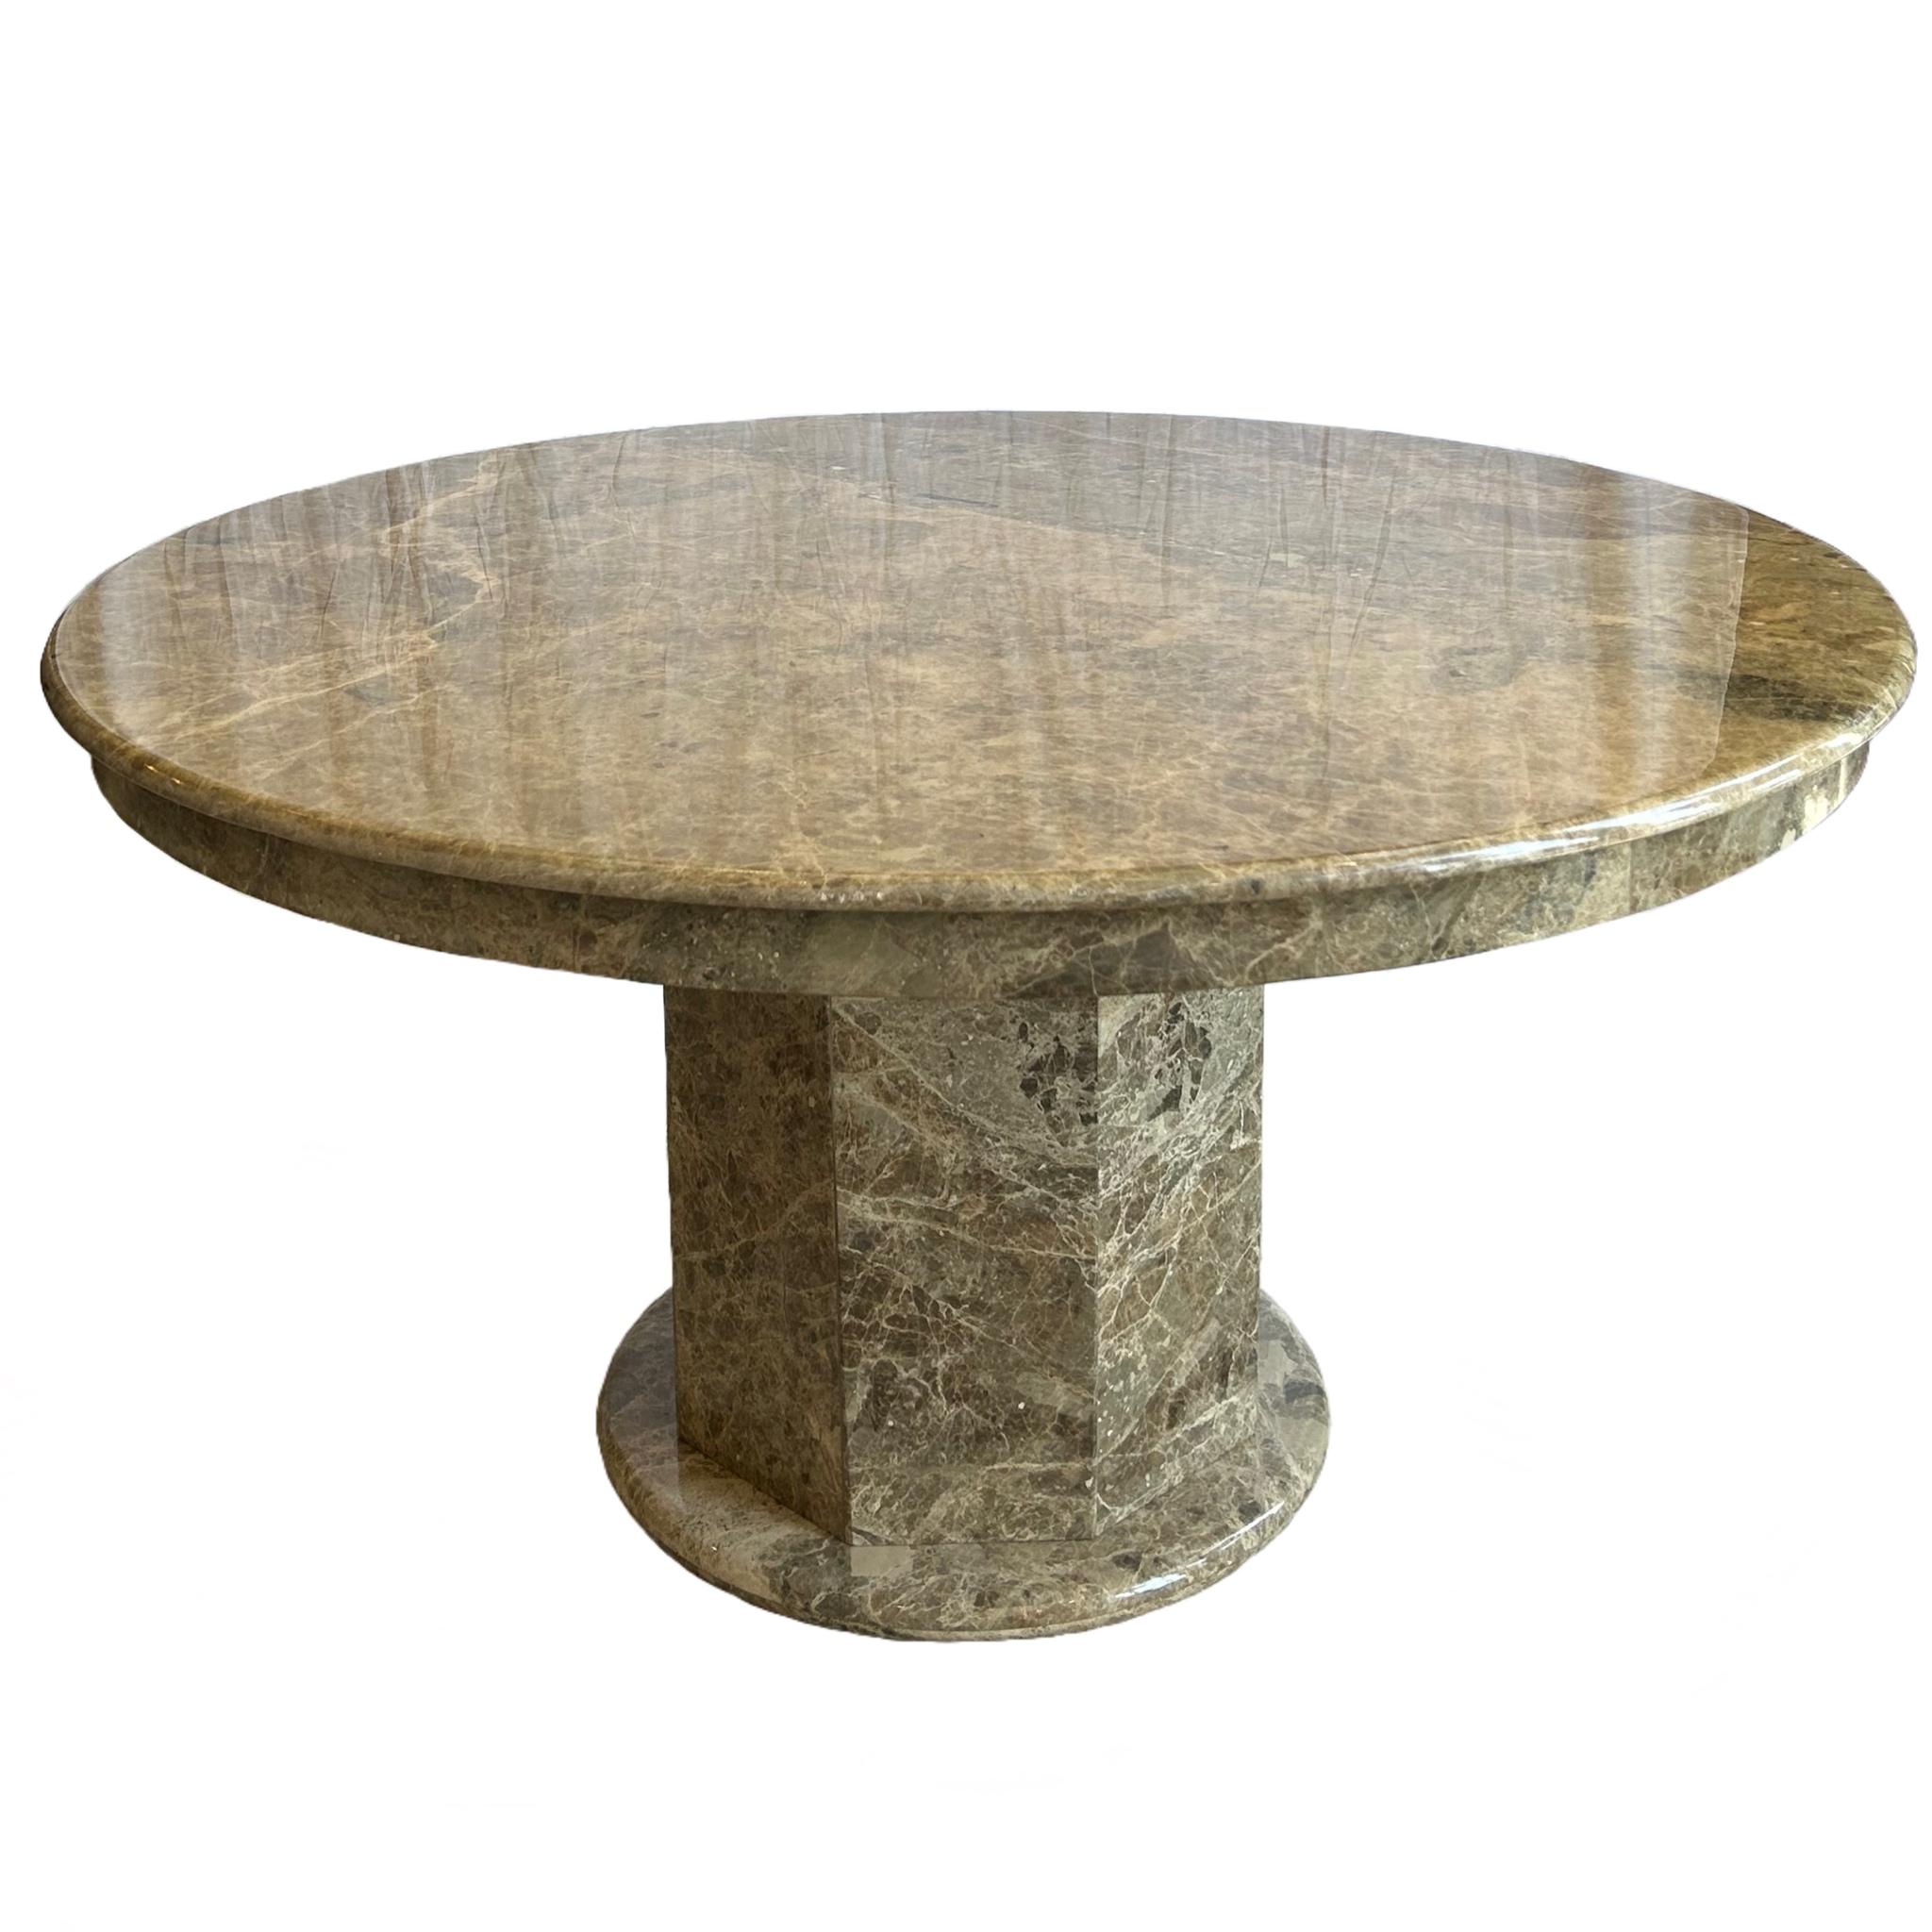 Large Round Marble Table on an 8 sided pillar base

Tan And Black Marble With White Veins

